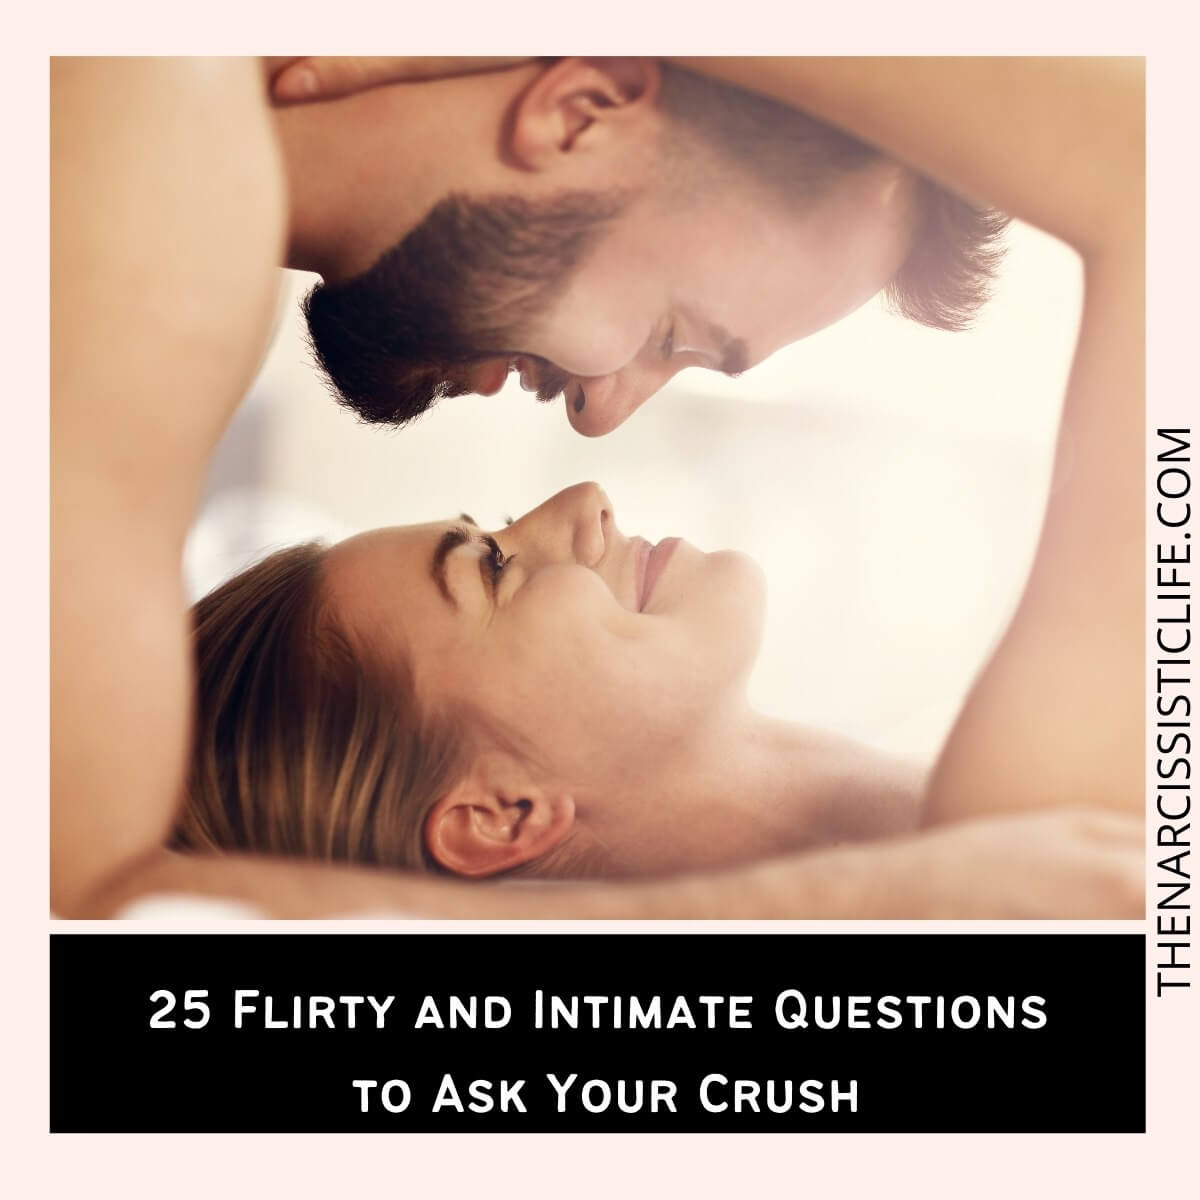 246 Really Flirty Questions To Ask Your Crush photo